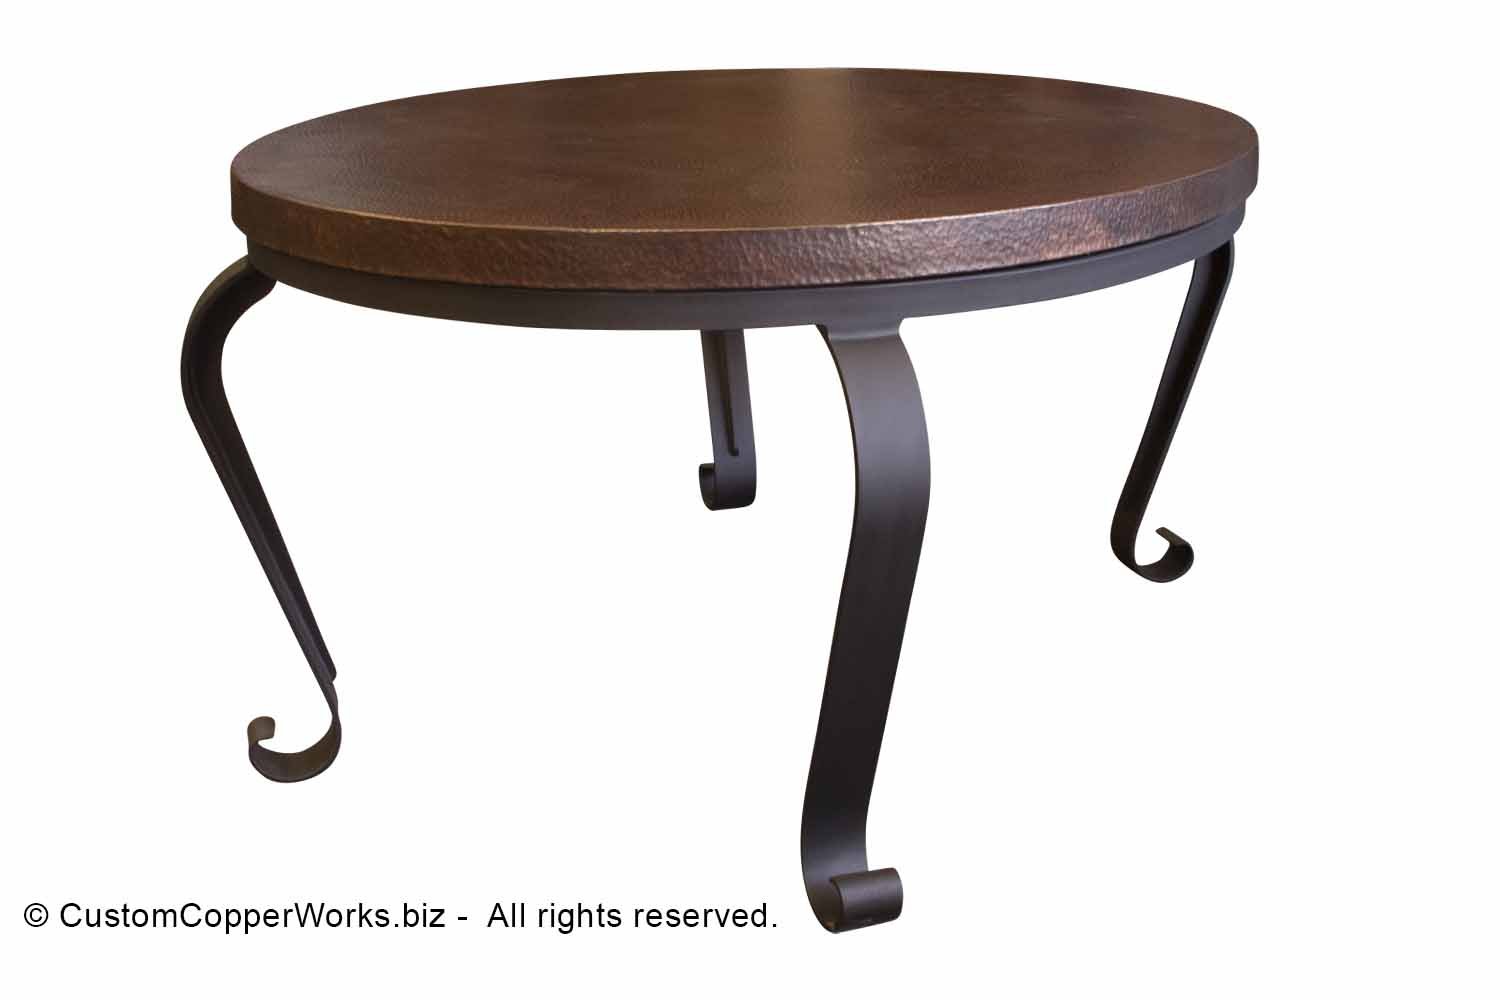 oval-copper-dining-table-iron-table-base-154-2.jpg